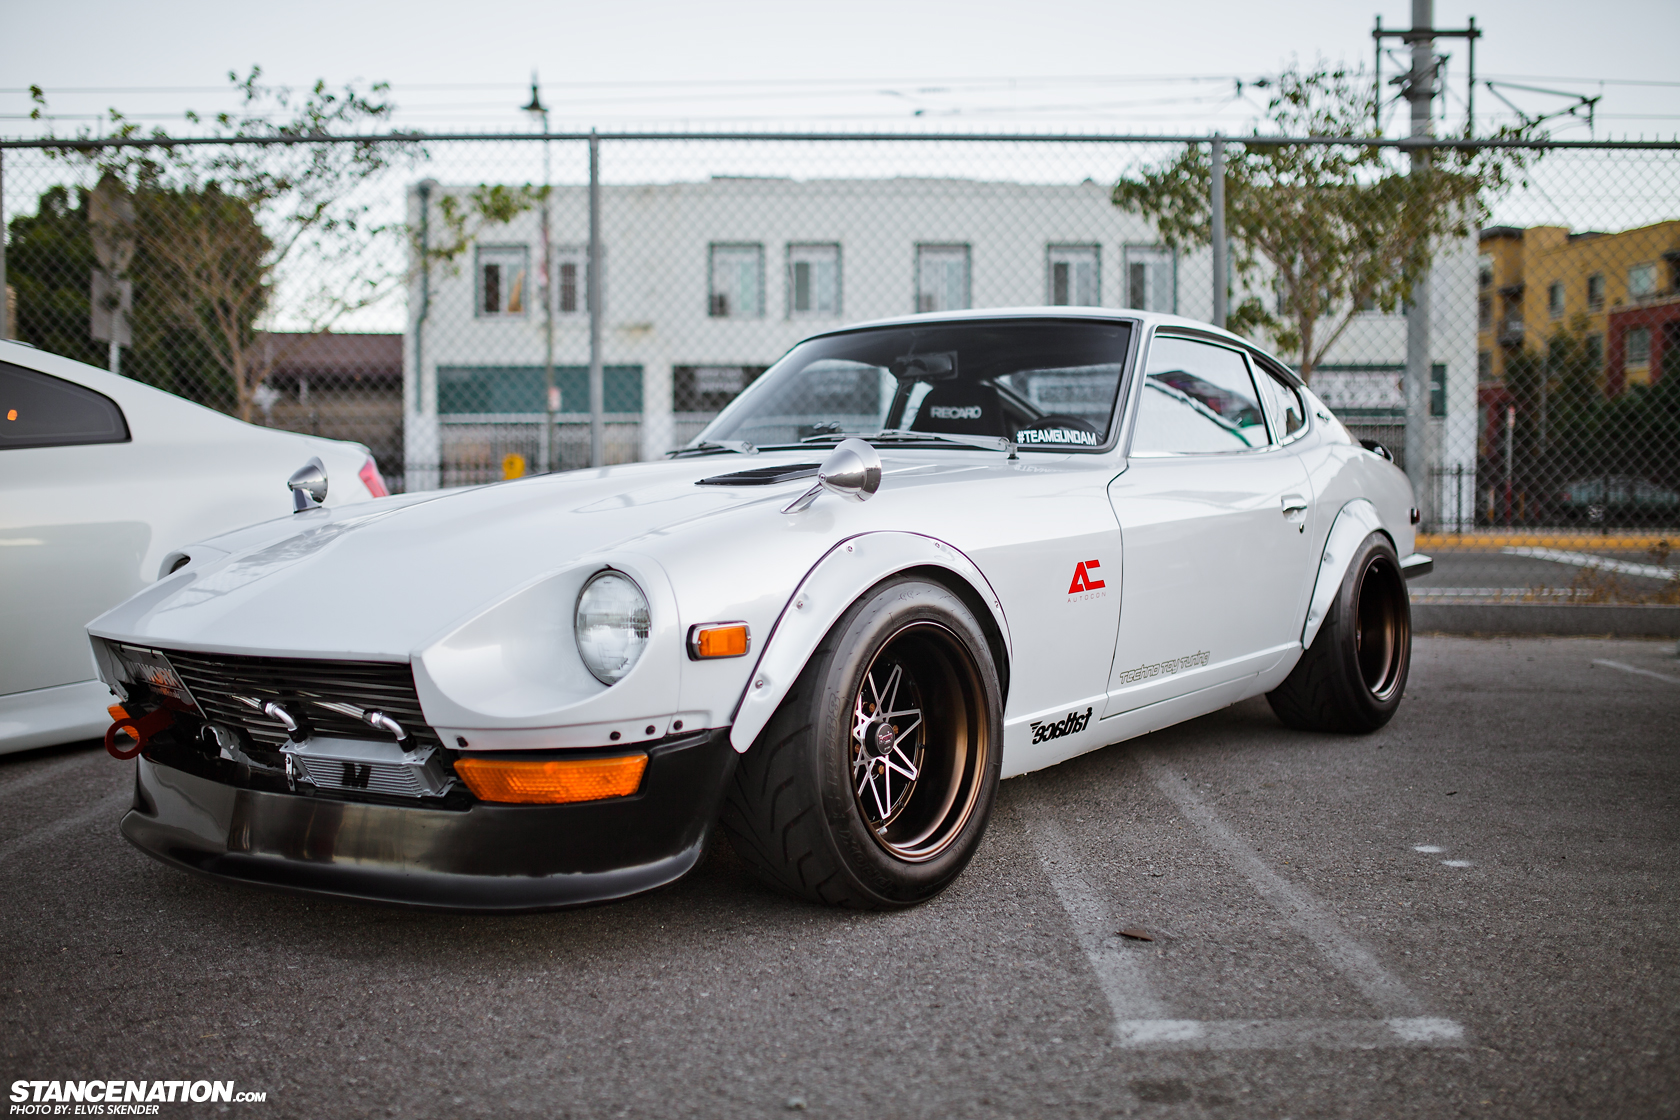 78+ images about Datsun 240, 260, 280Z. on Pinterest Classic, Vehicles and ...